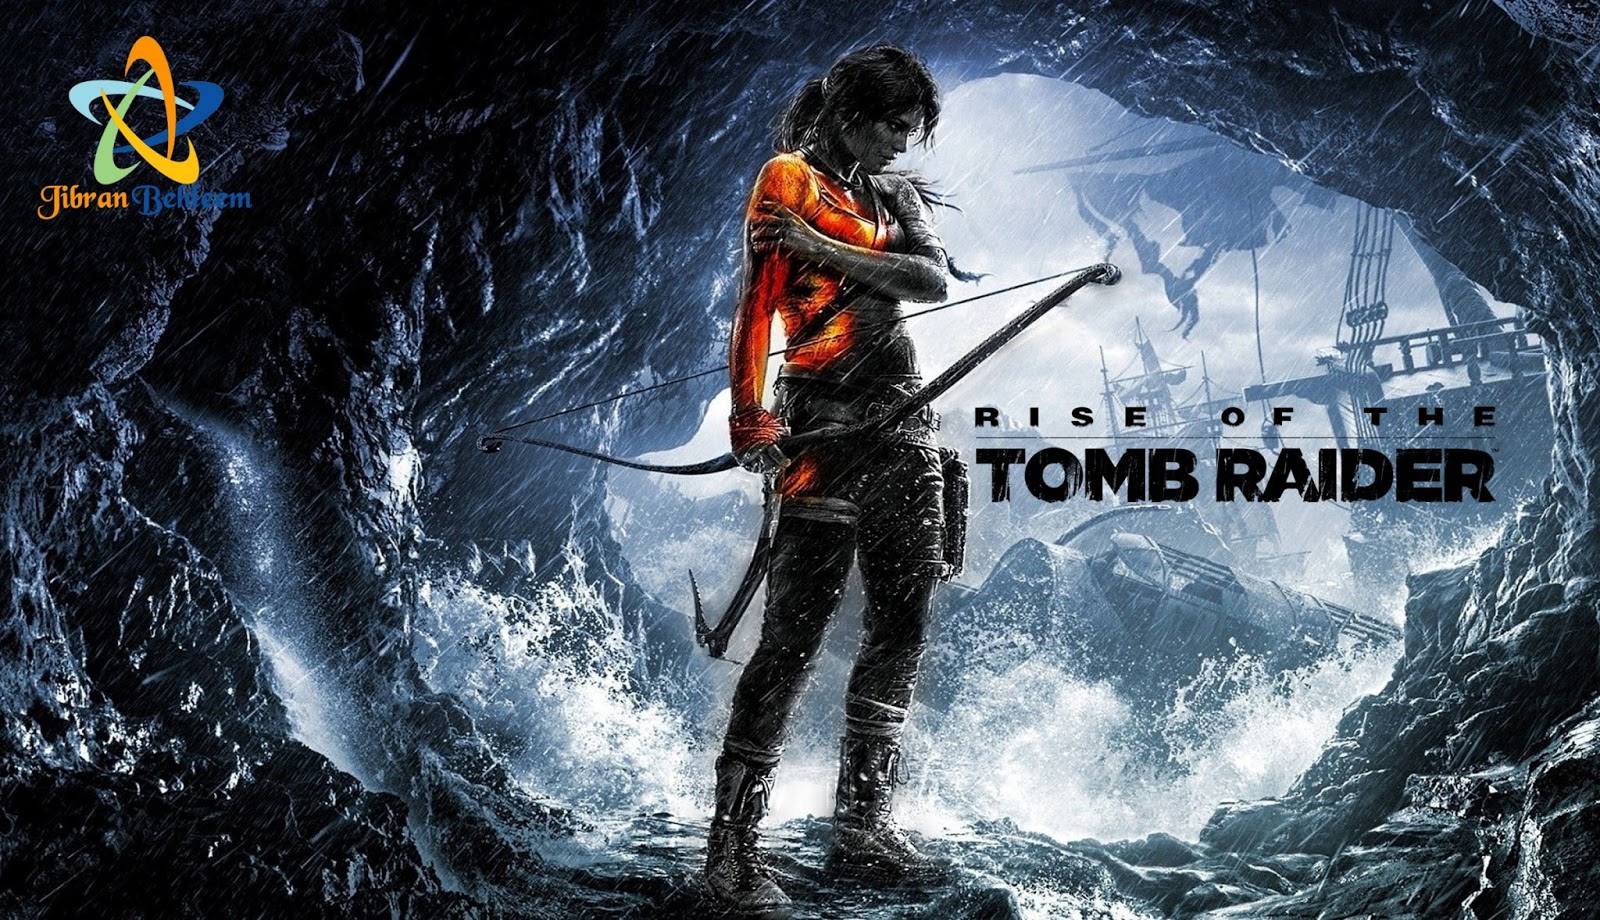 download rise of the tomb raider release date for free